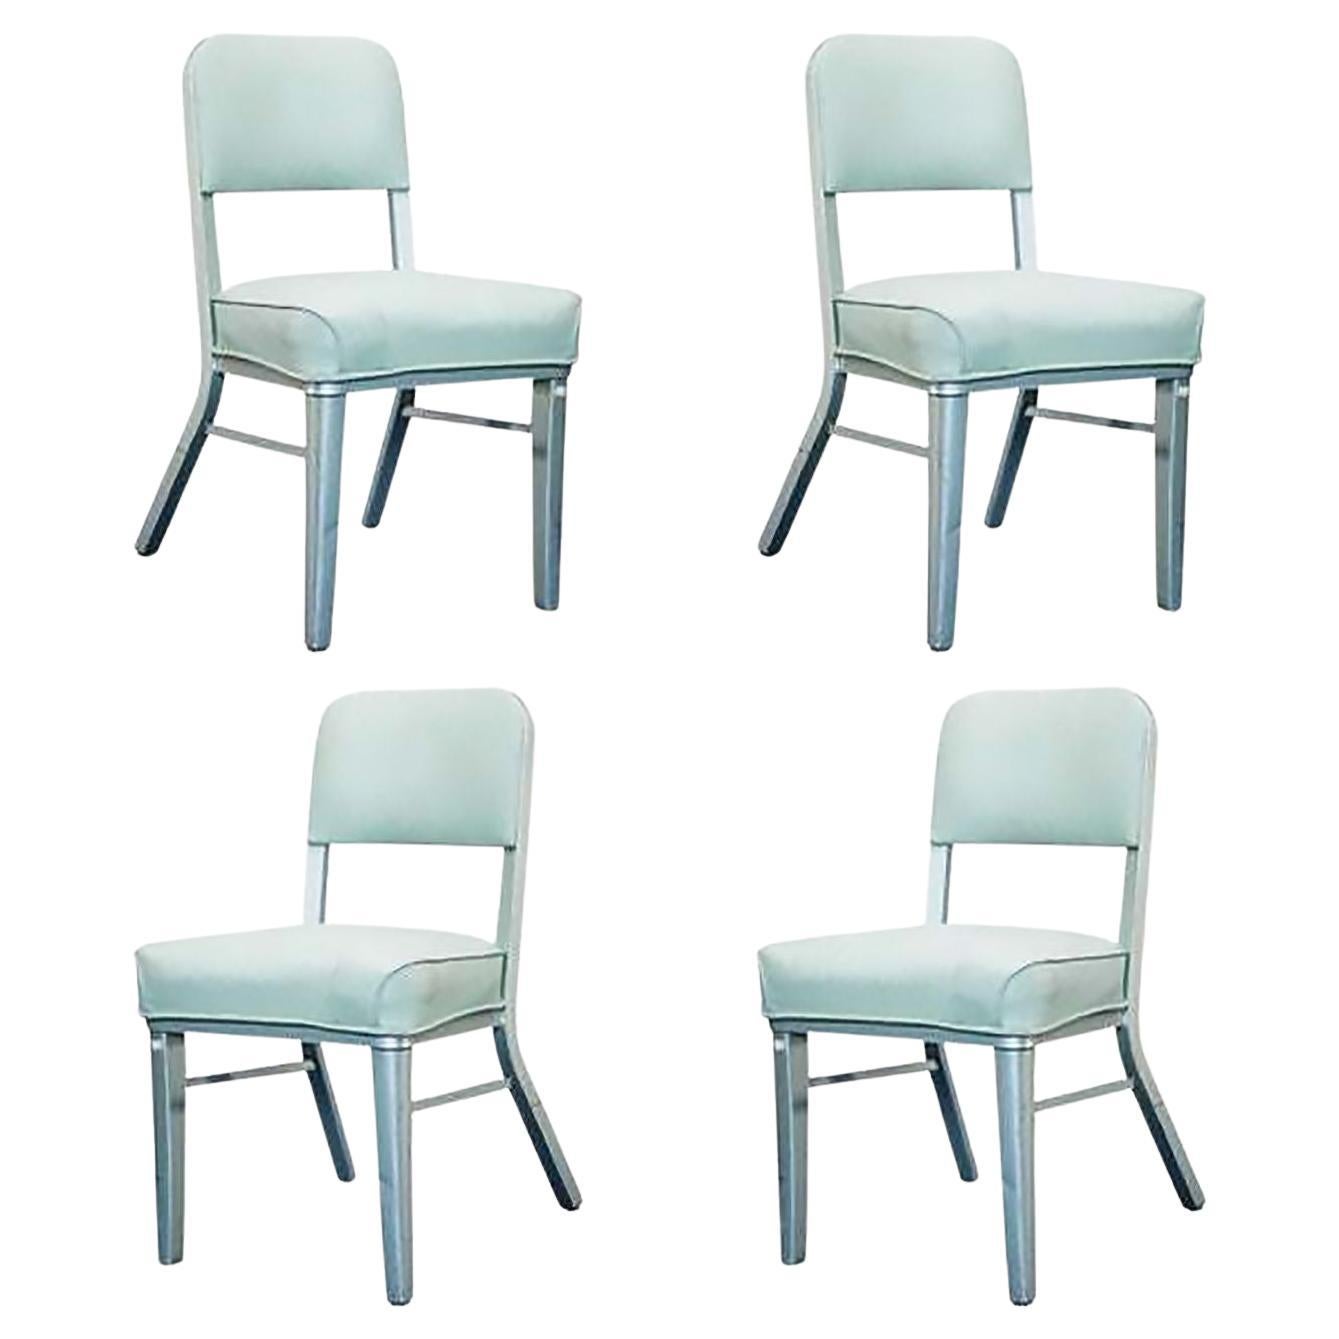 Set of Four Steelcase Industrial Tanker Chairs